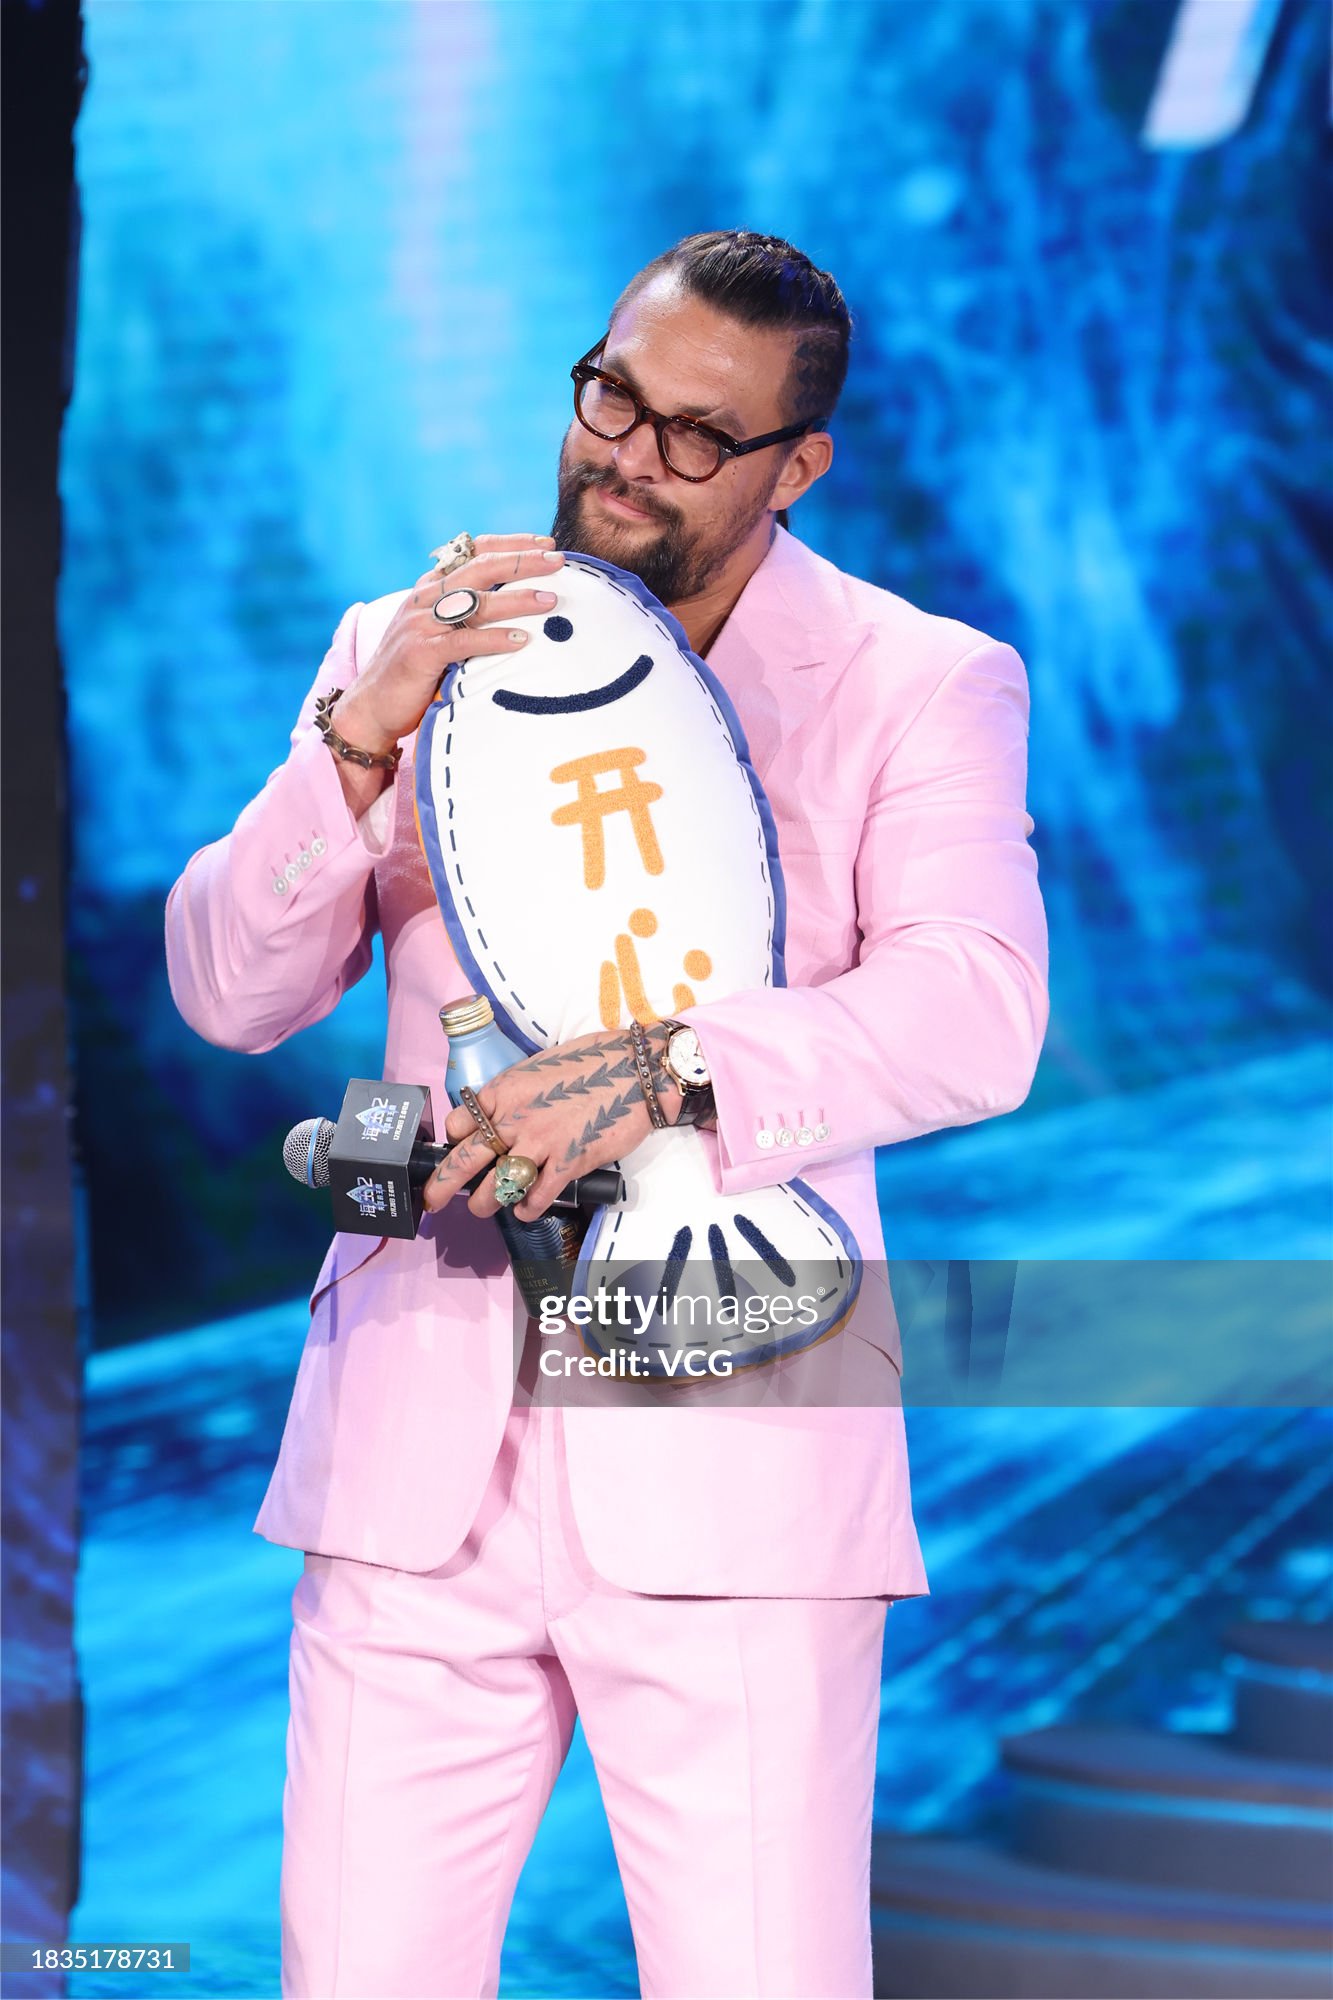 aquaman-and-the-lost-kingdom-beijing-press-conference.jpg